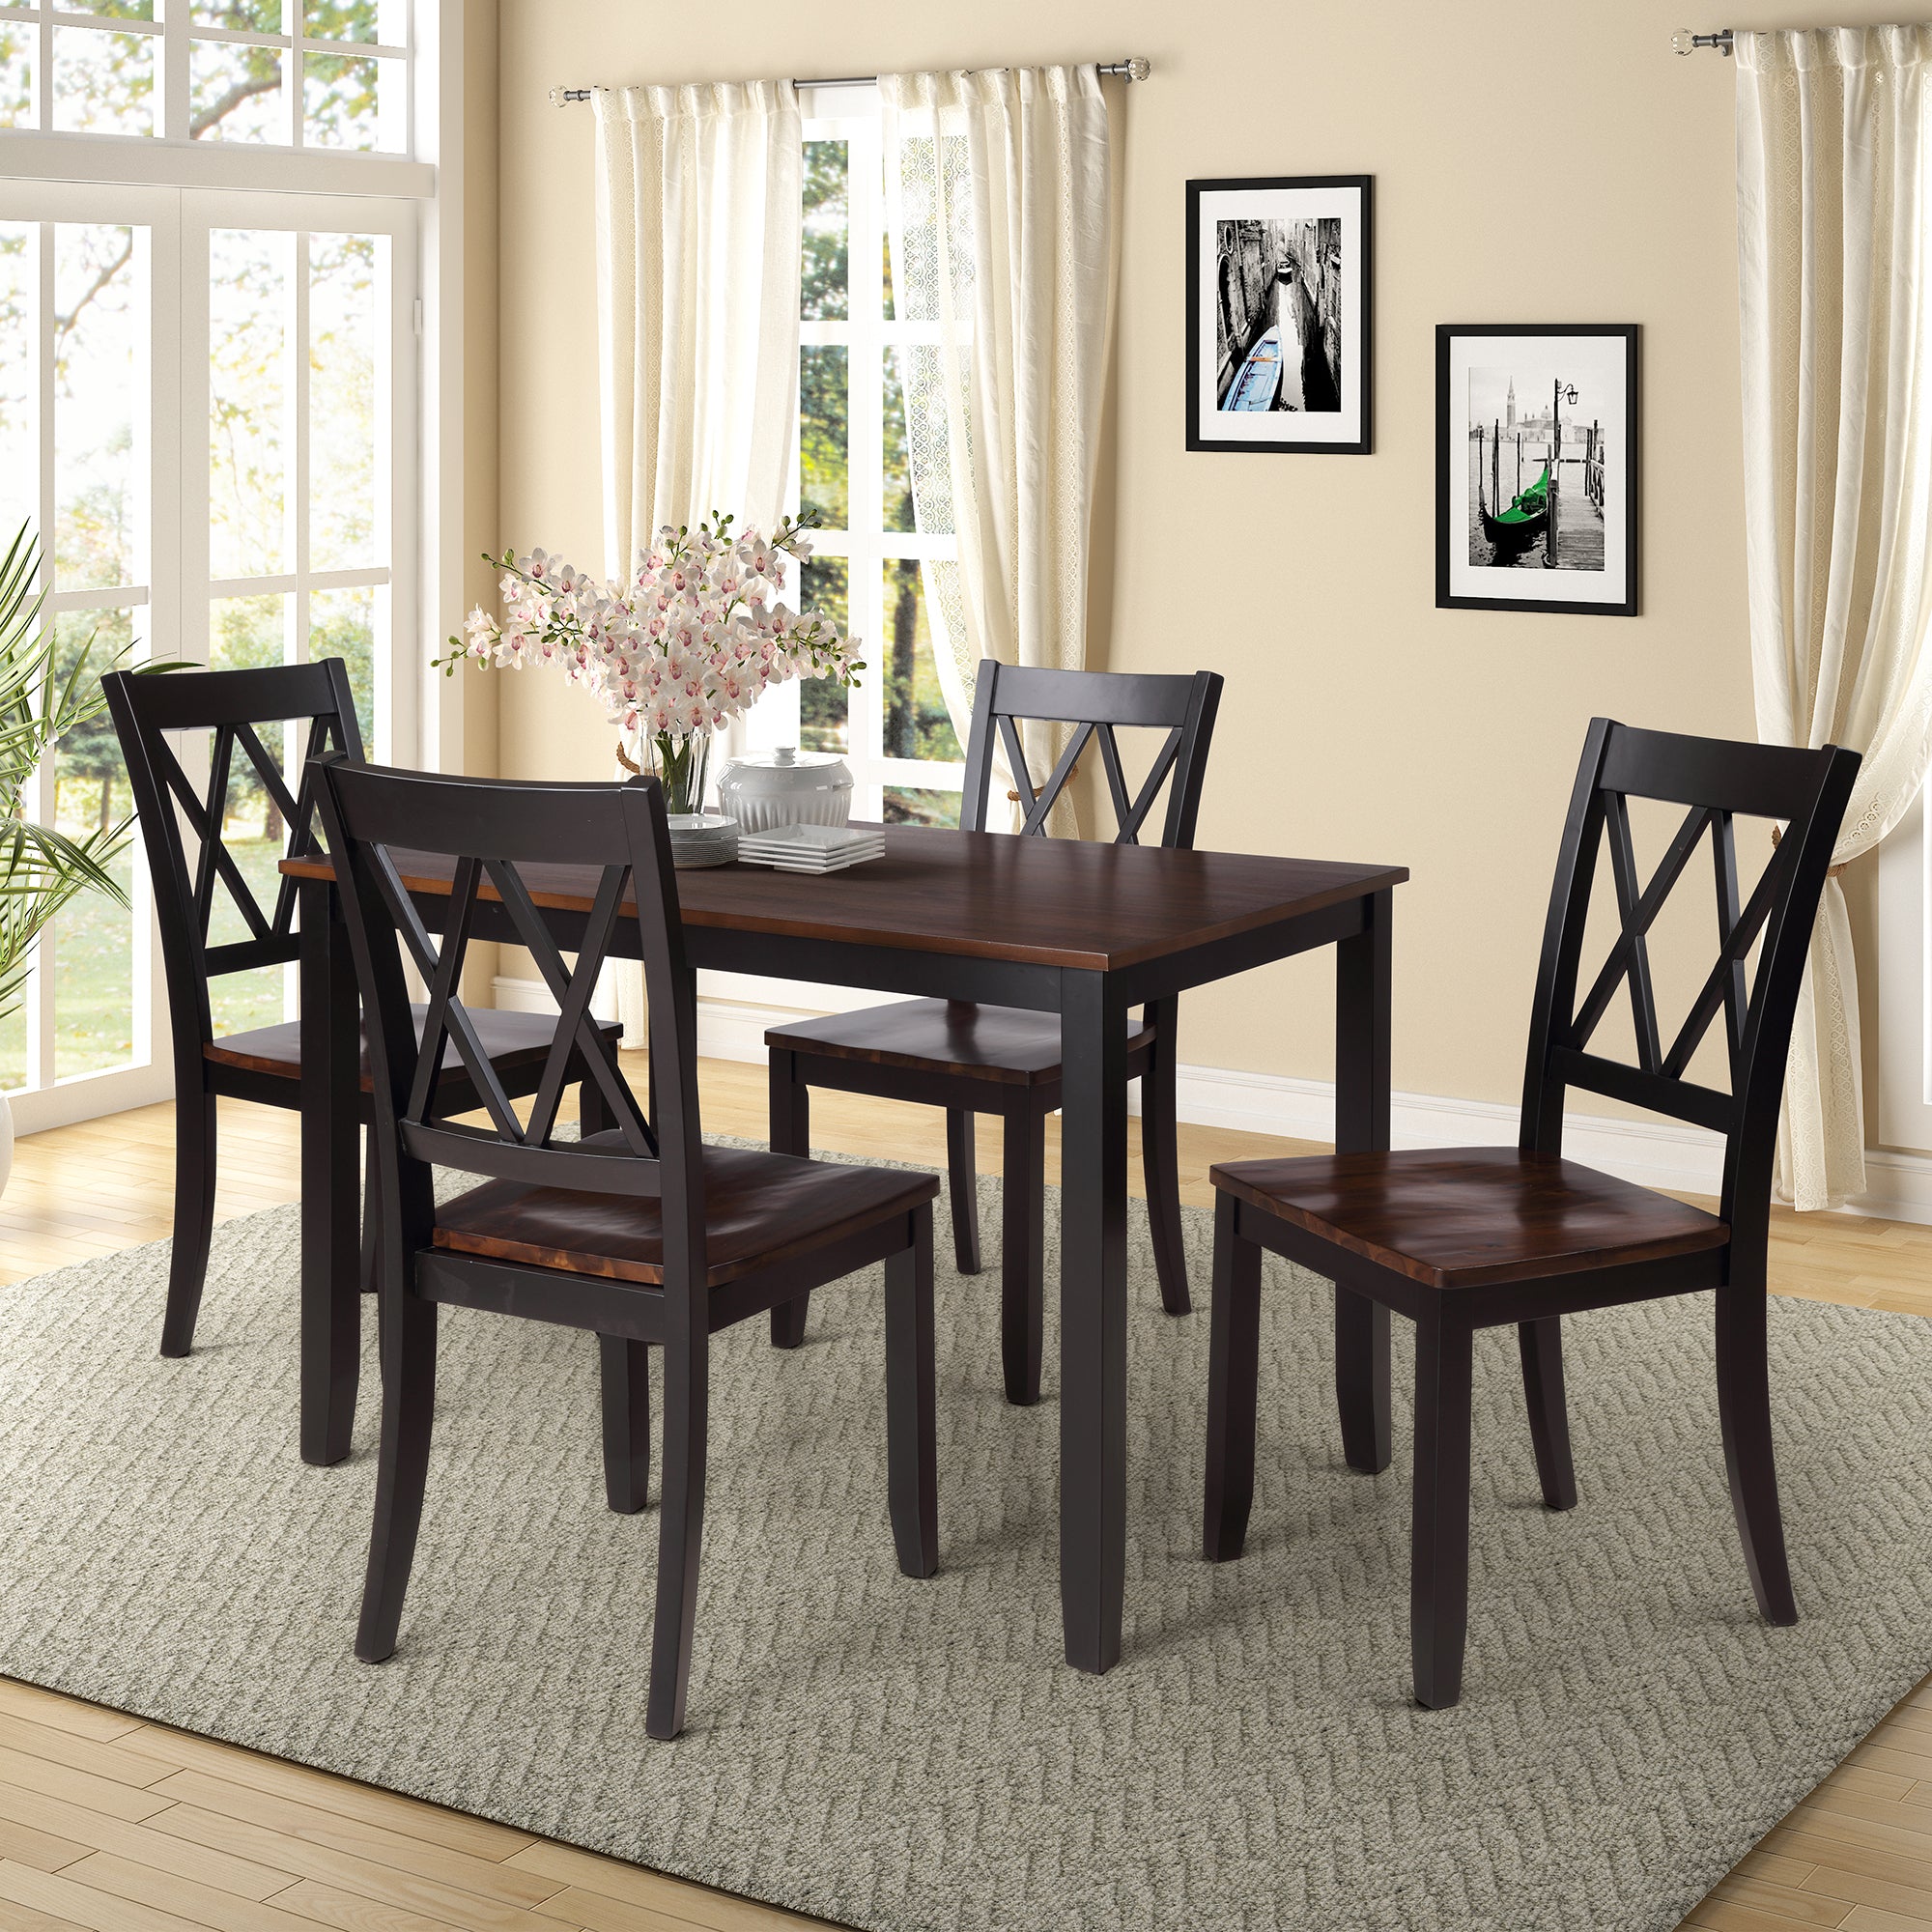 🆓🚛 5-Piece Dining Table Set Home Kitchen Table & Chairs Wood Dining Set, Black+Cherry